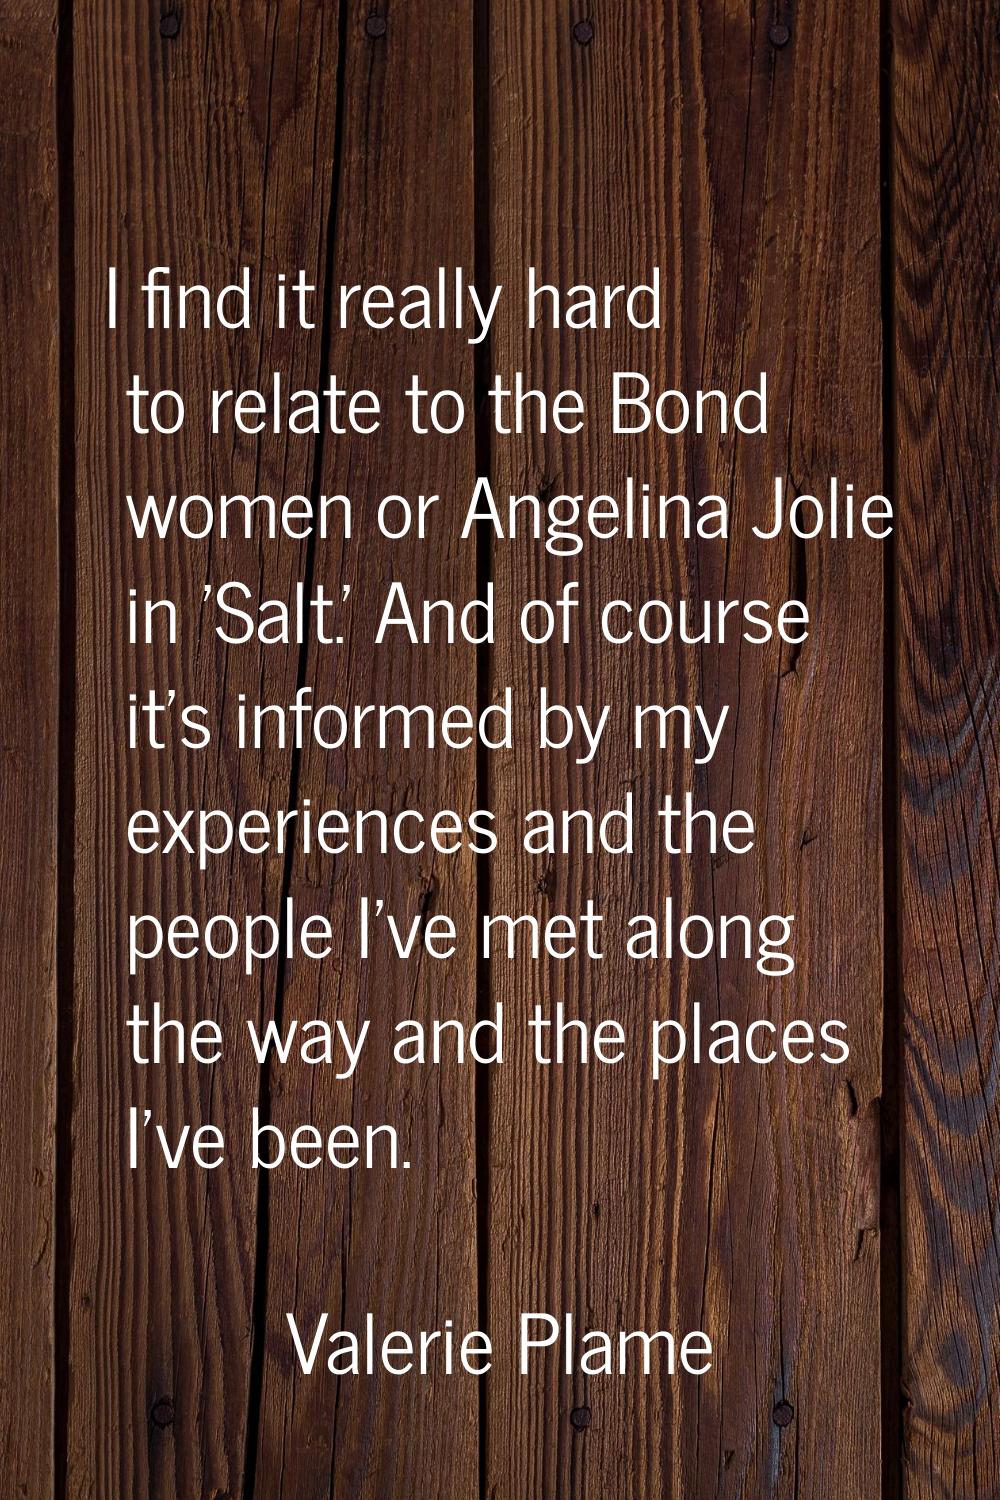 I find it really hard to relate to the Bond women or Angelina Jolie in 'Salt.' And of course it's i